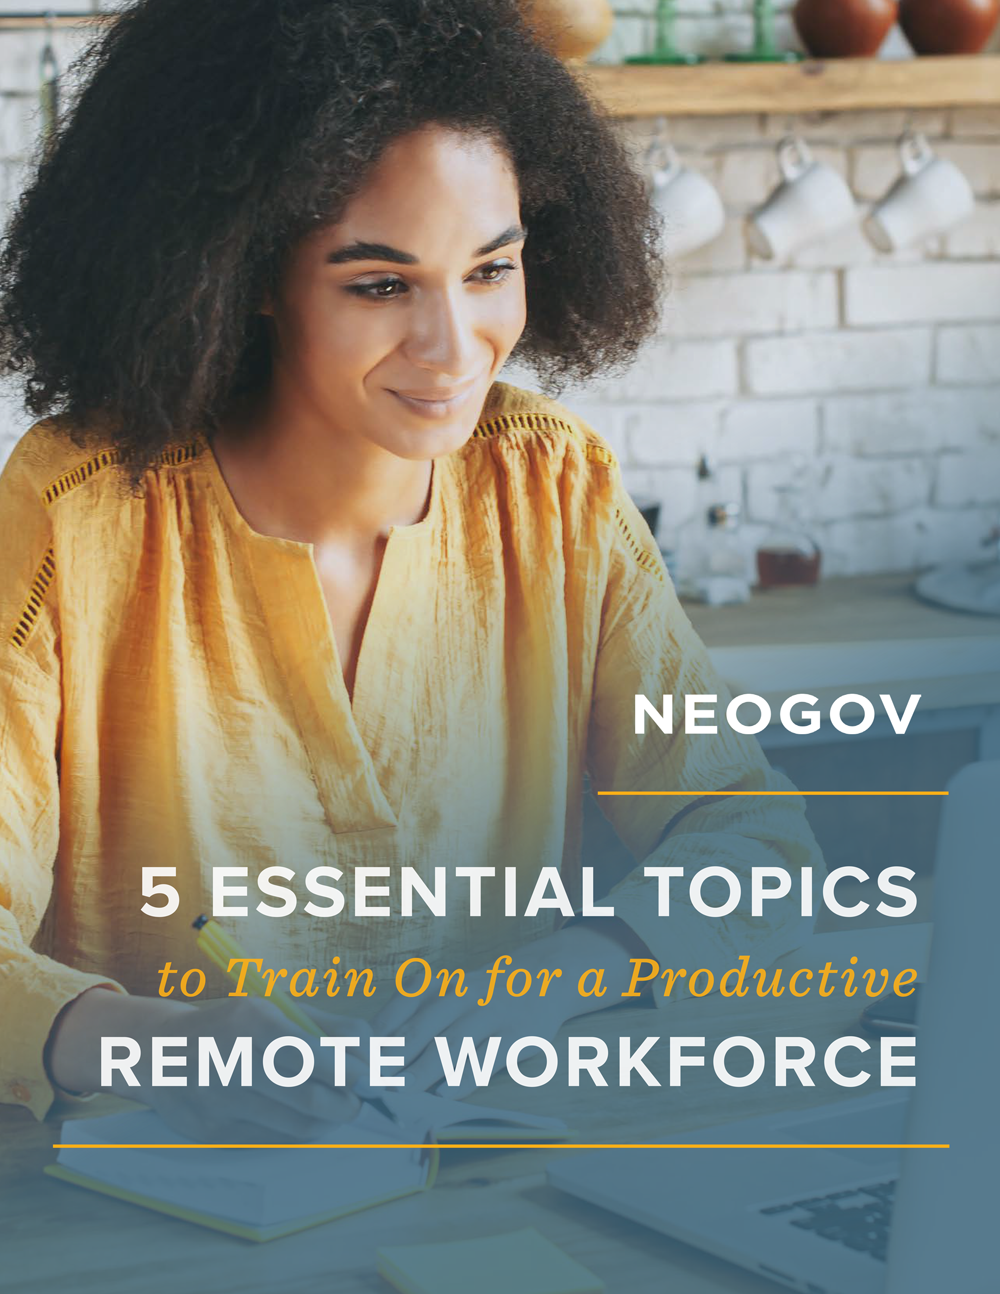 5 Essential Topics to Train On for a Productive Remote Workforce